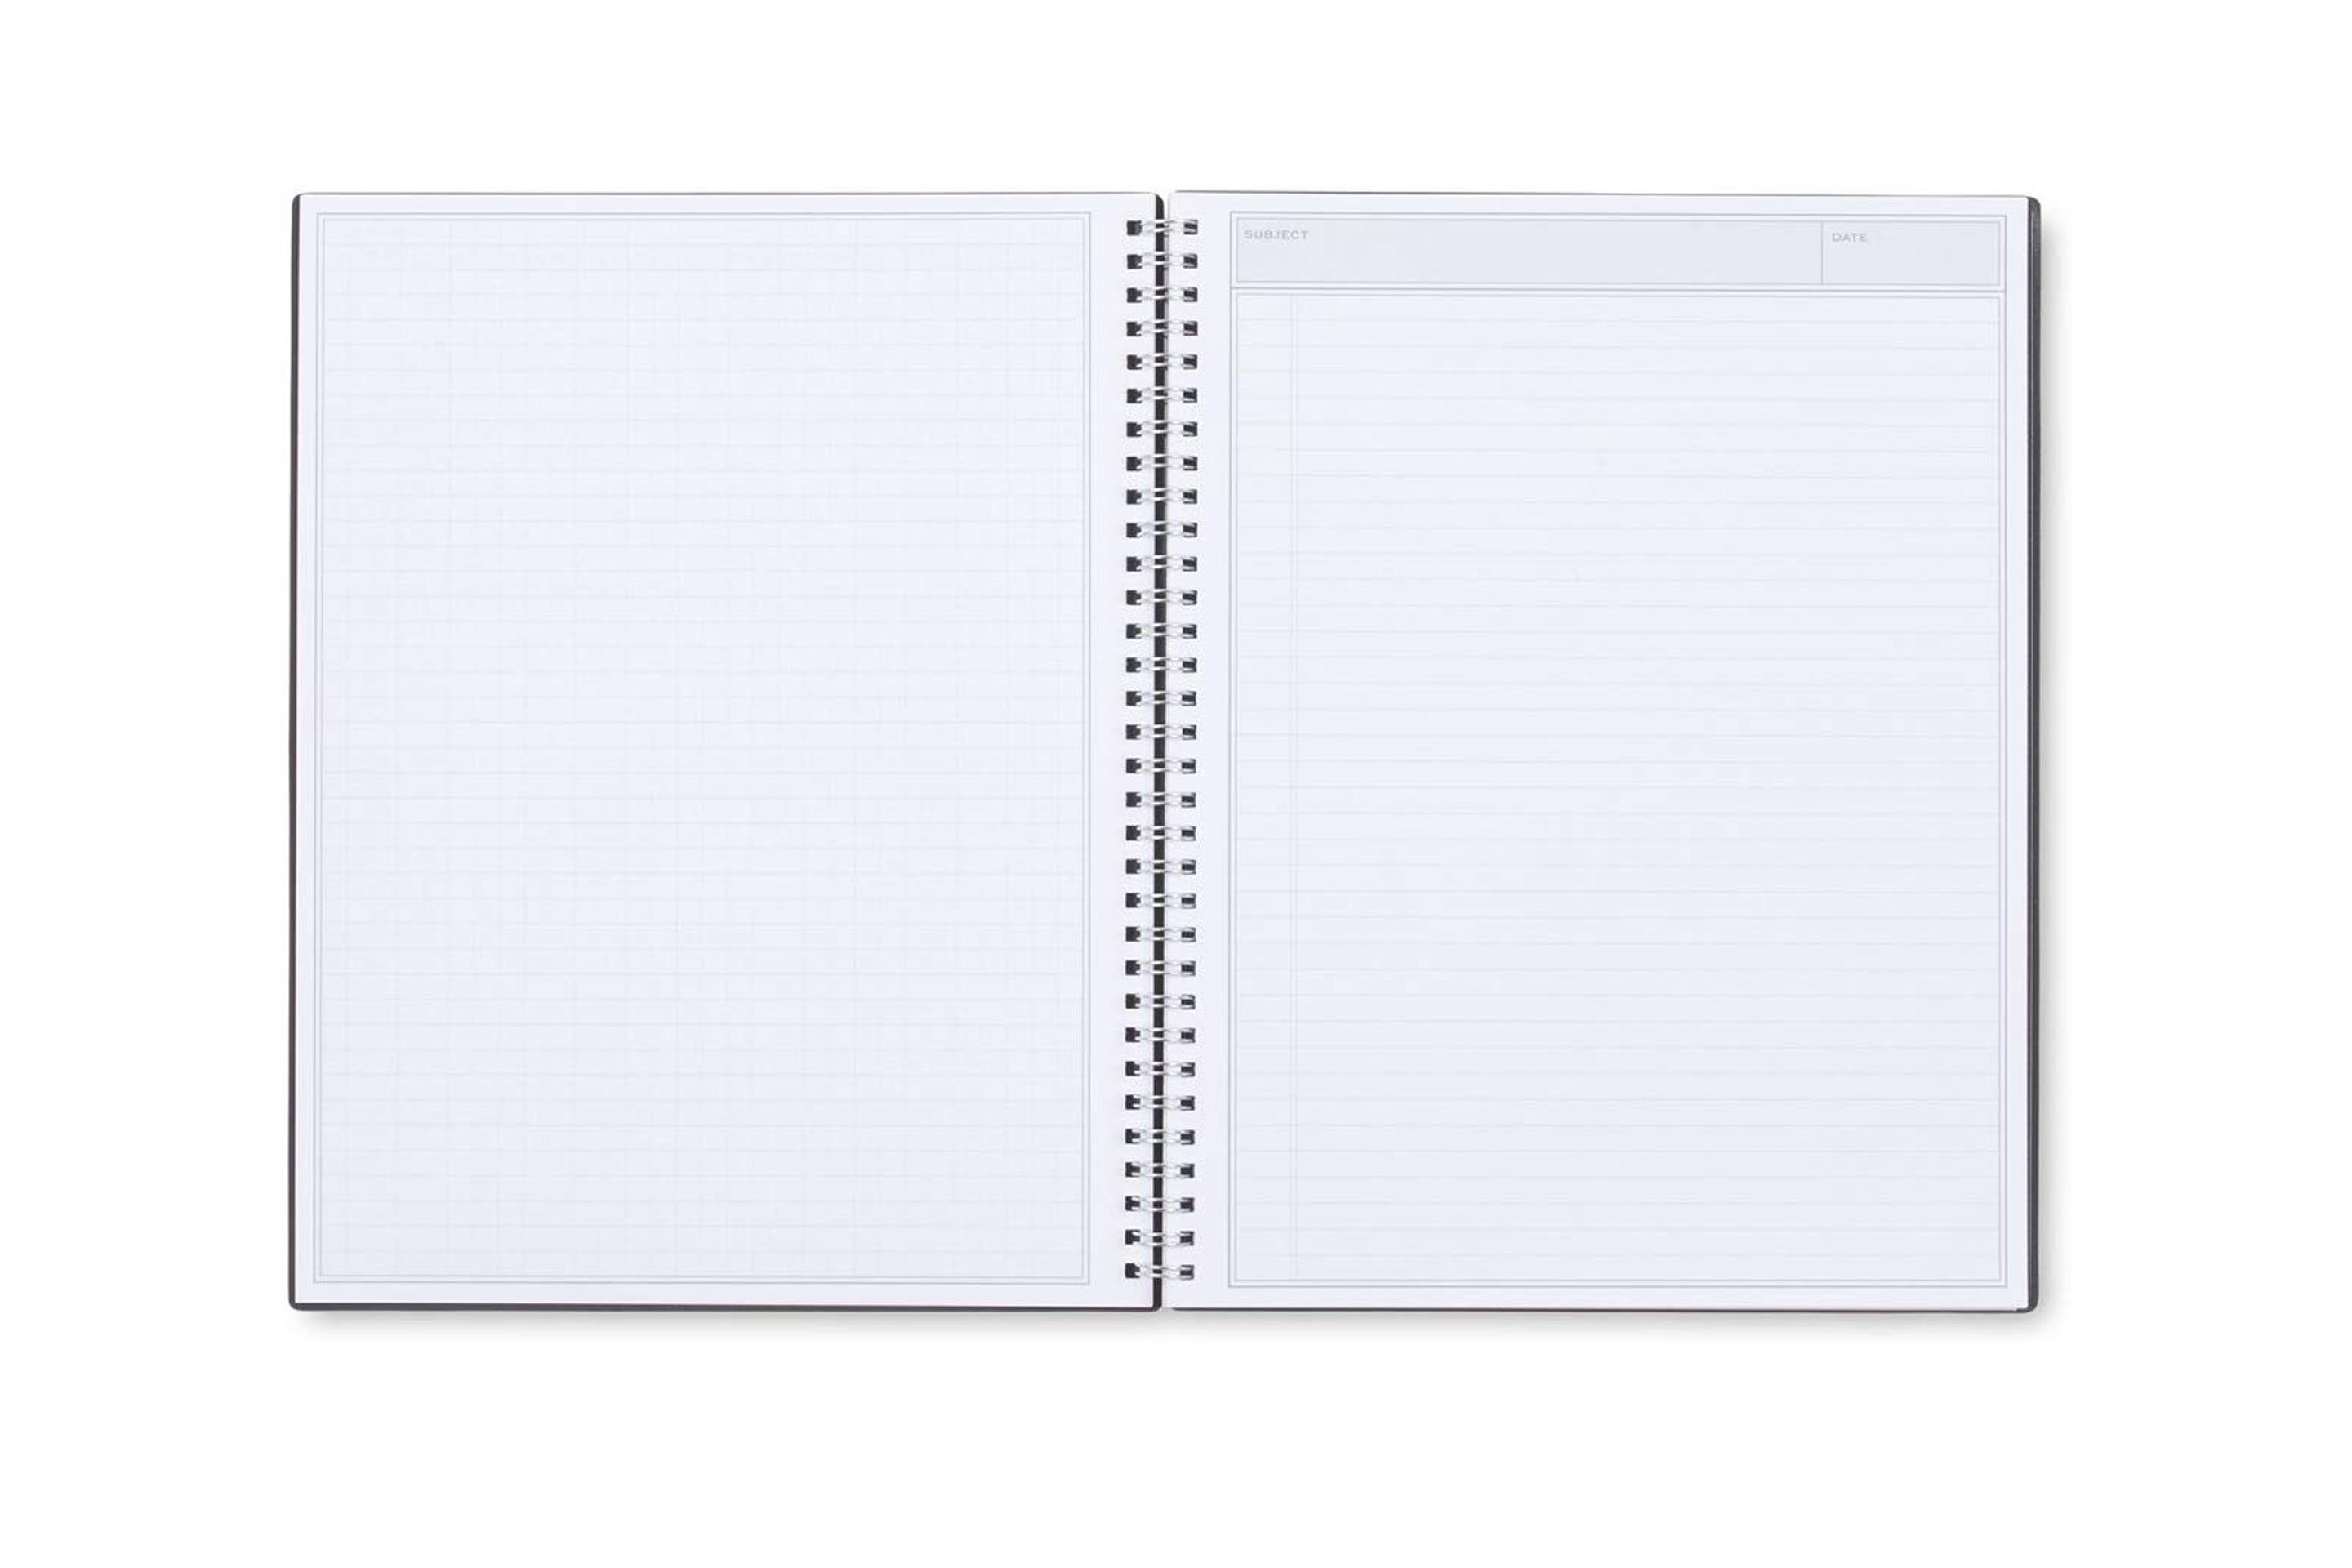 Ample lined writing space and graph sheet with subject and date header for notes, meetings, and writing down projects.